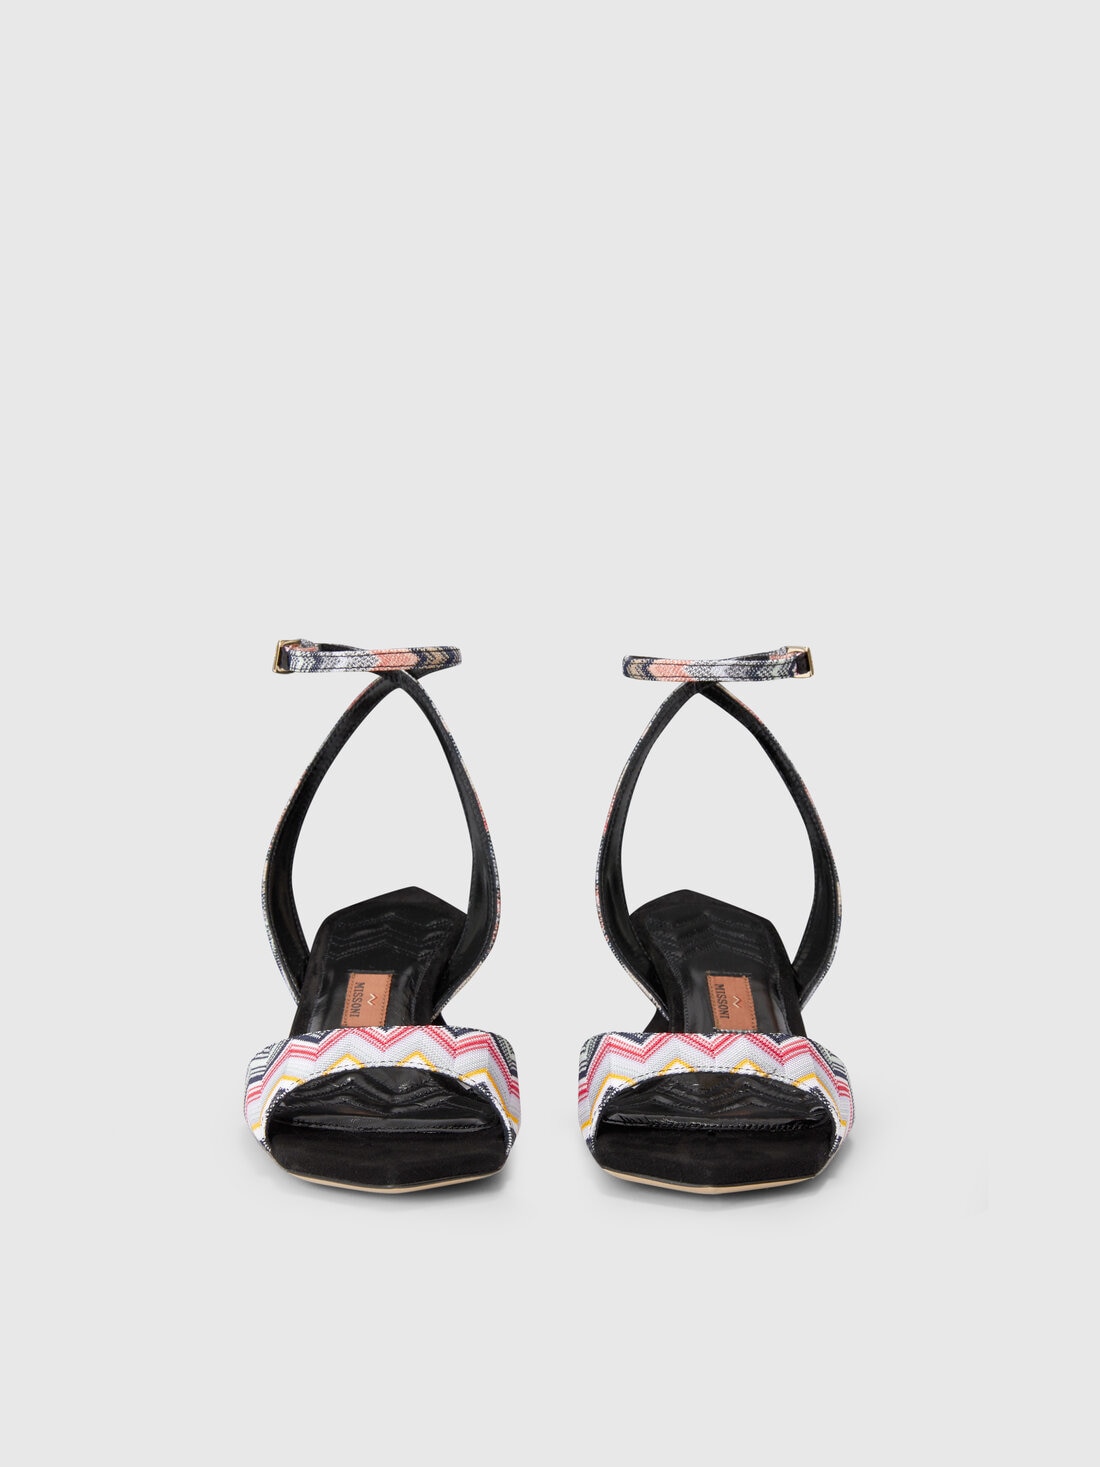 Sandals with strap and chevron pattern, Black    - LS24SY05BV00FYS91KP - 2